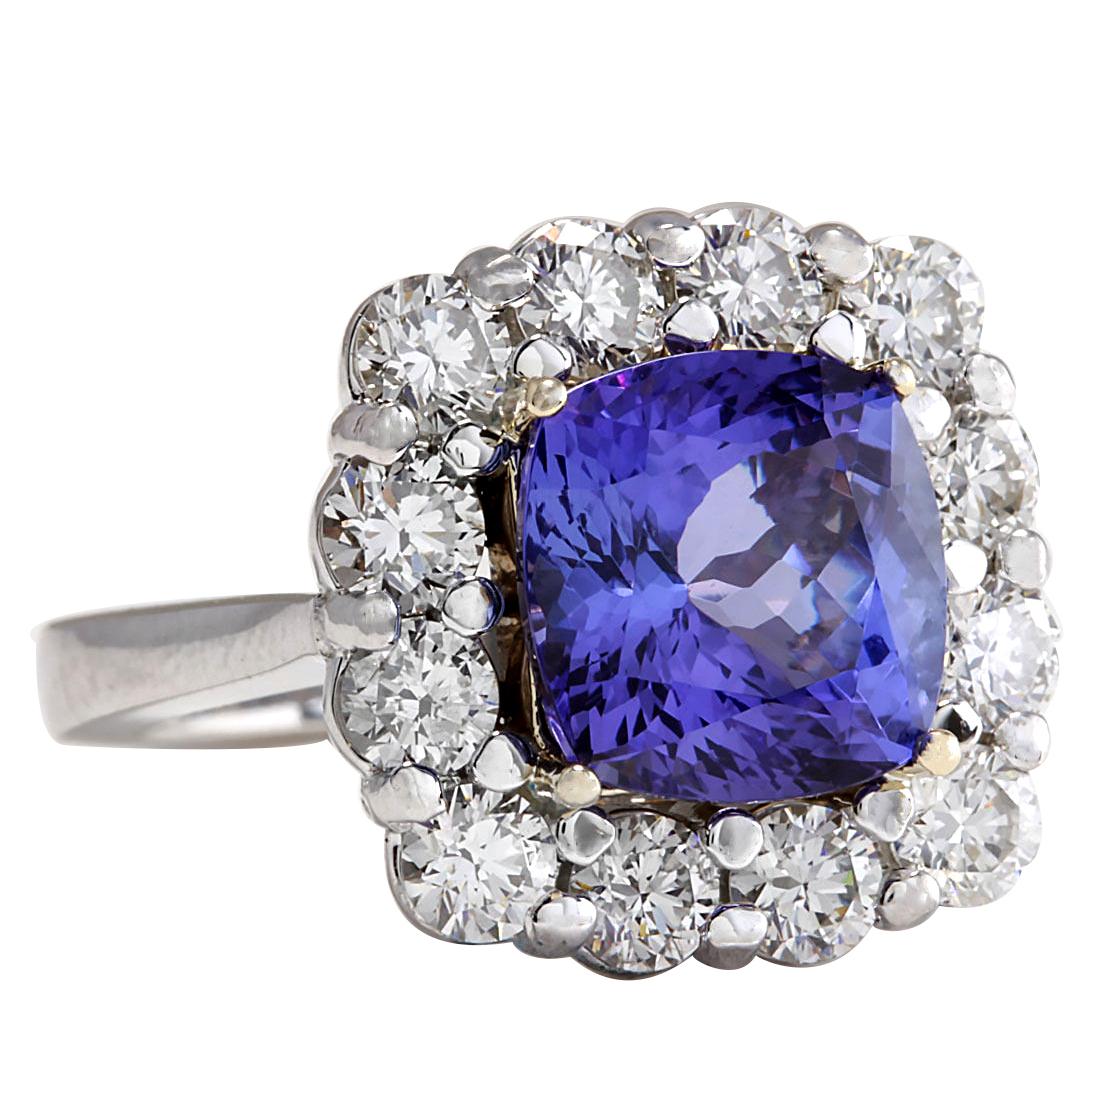 Stamped: 18K White Gold<br />Total Ring Weight: 10.0 Grams<br />Ring Length: N/A<br />Ring Width: N/A<br />Gemstone Weight: Total  Tanzanite Weight is 4.88 Carat (Measures: 10.00x9.98 mm)<br />Color: Blue<br />Diamond Weight: Total  Diamond Weight